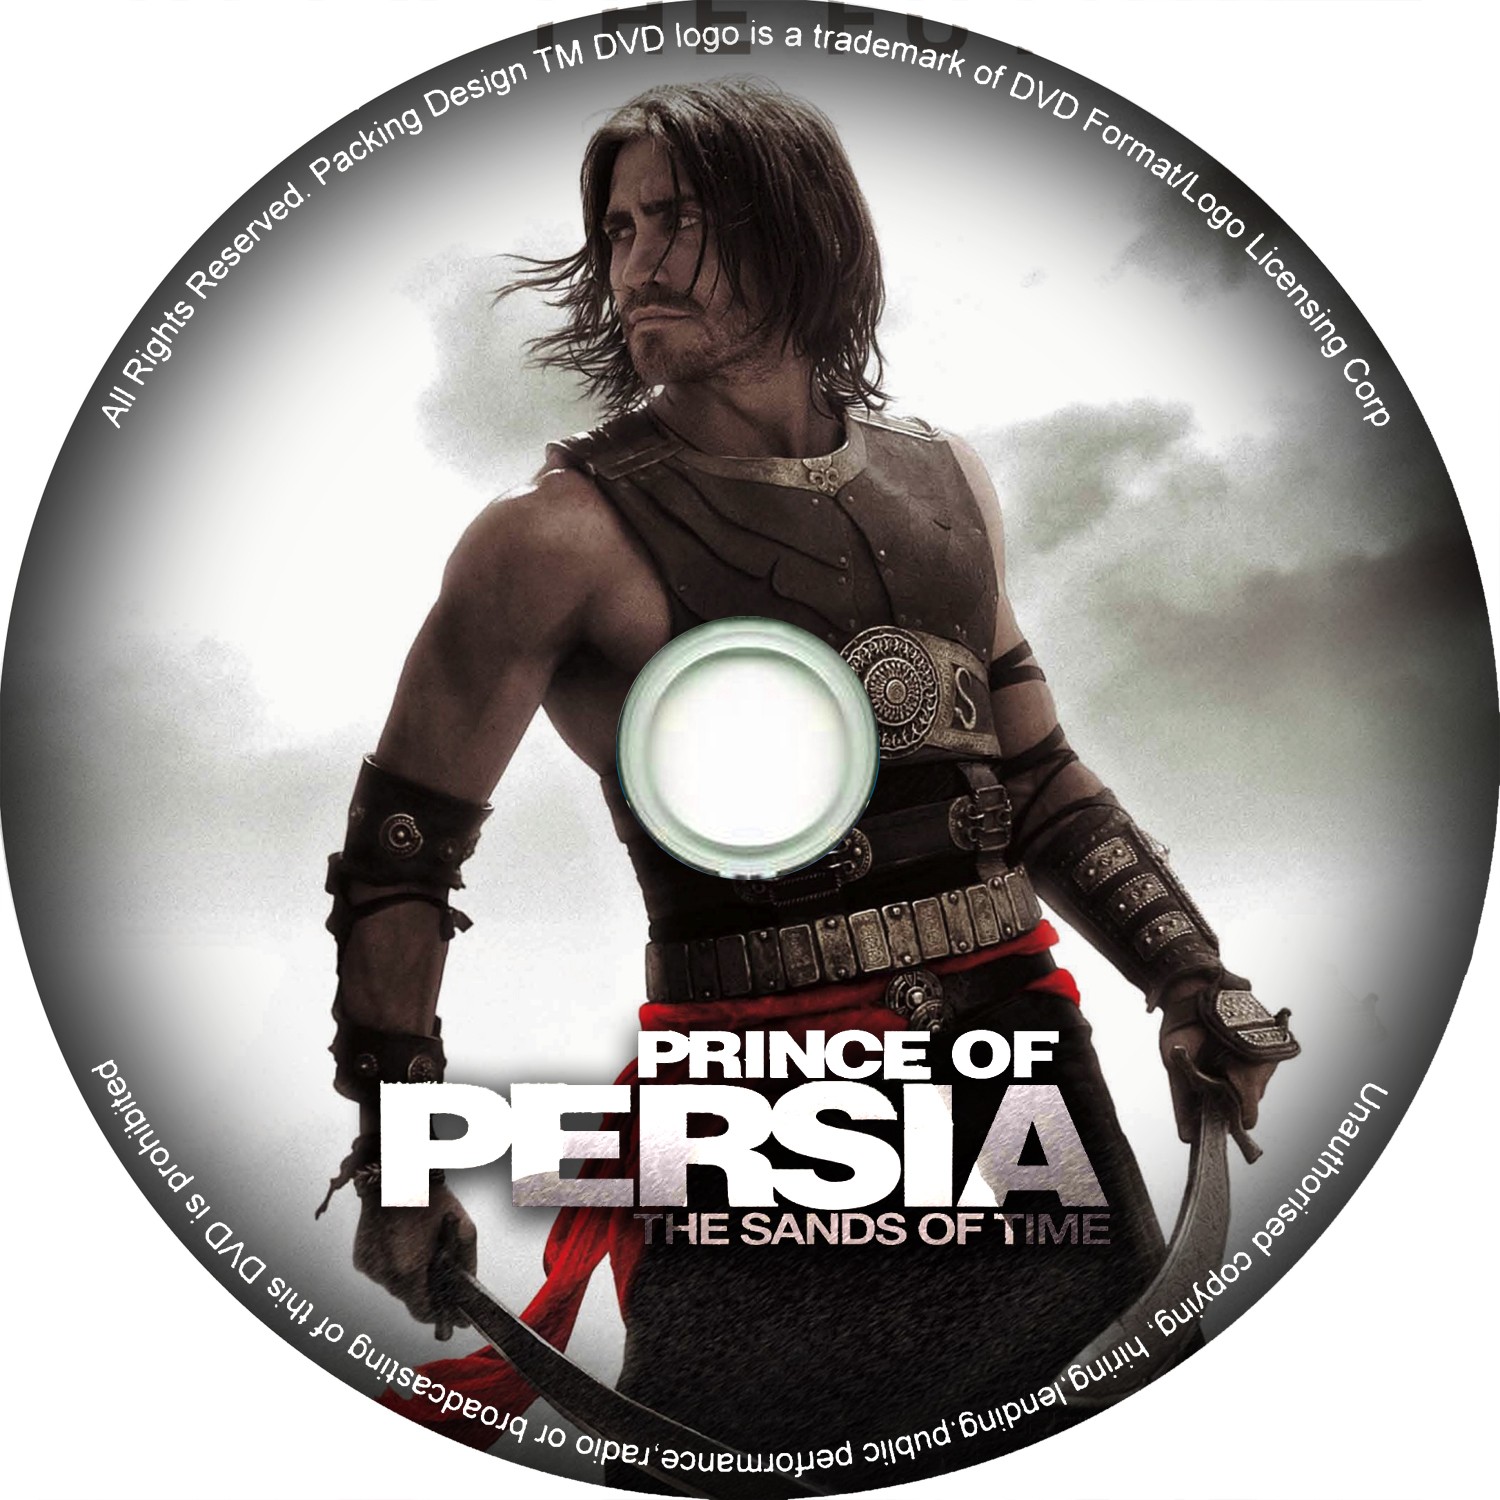 Prince of Persia: The Sands of Time (2010) Review